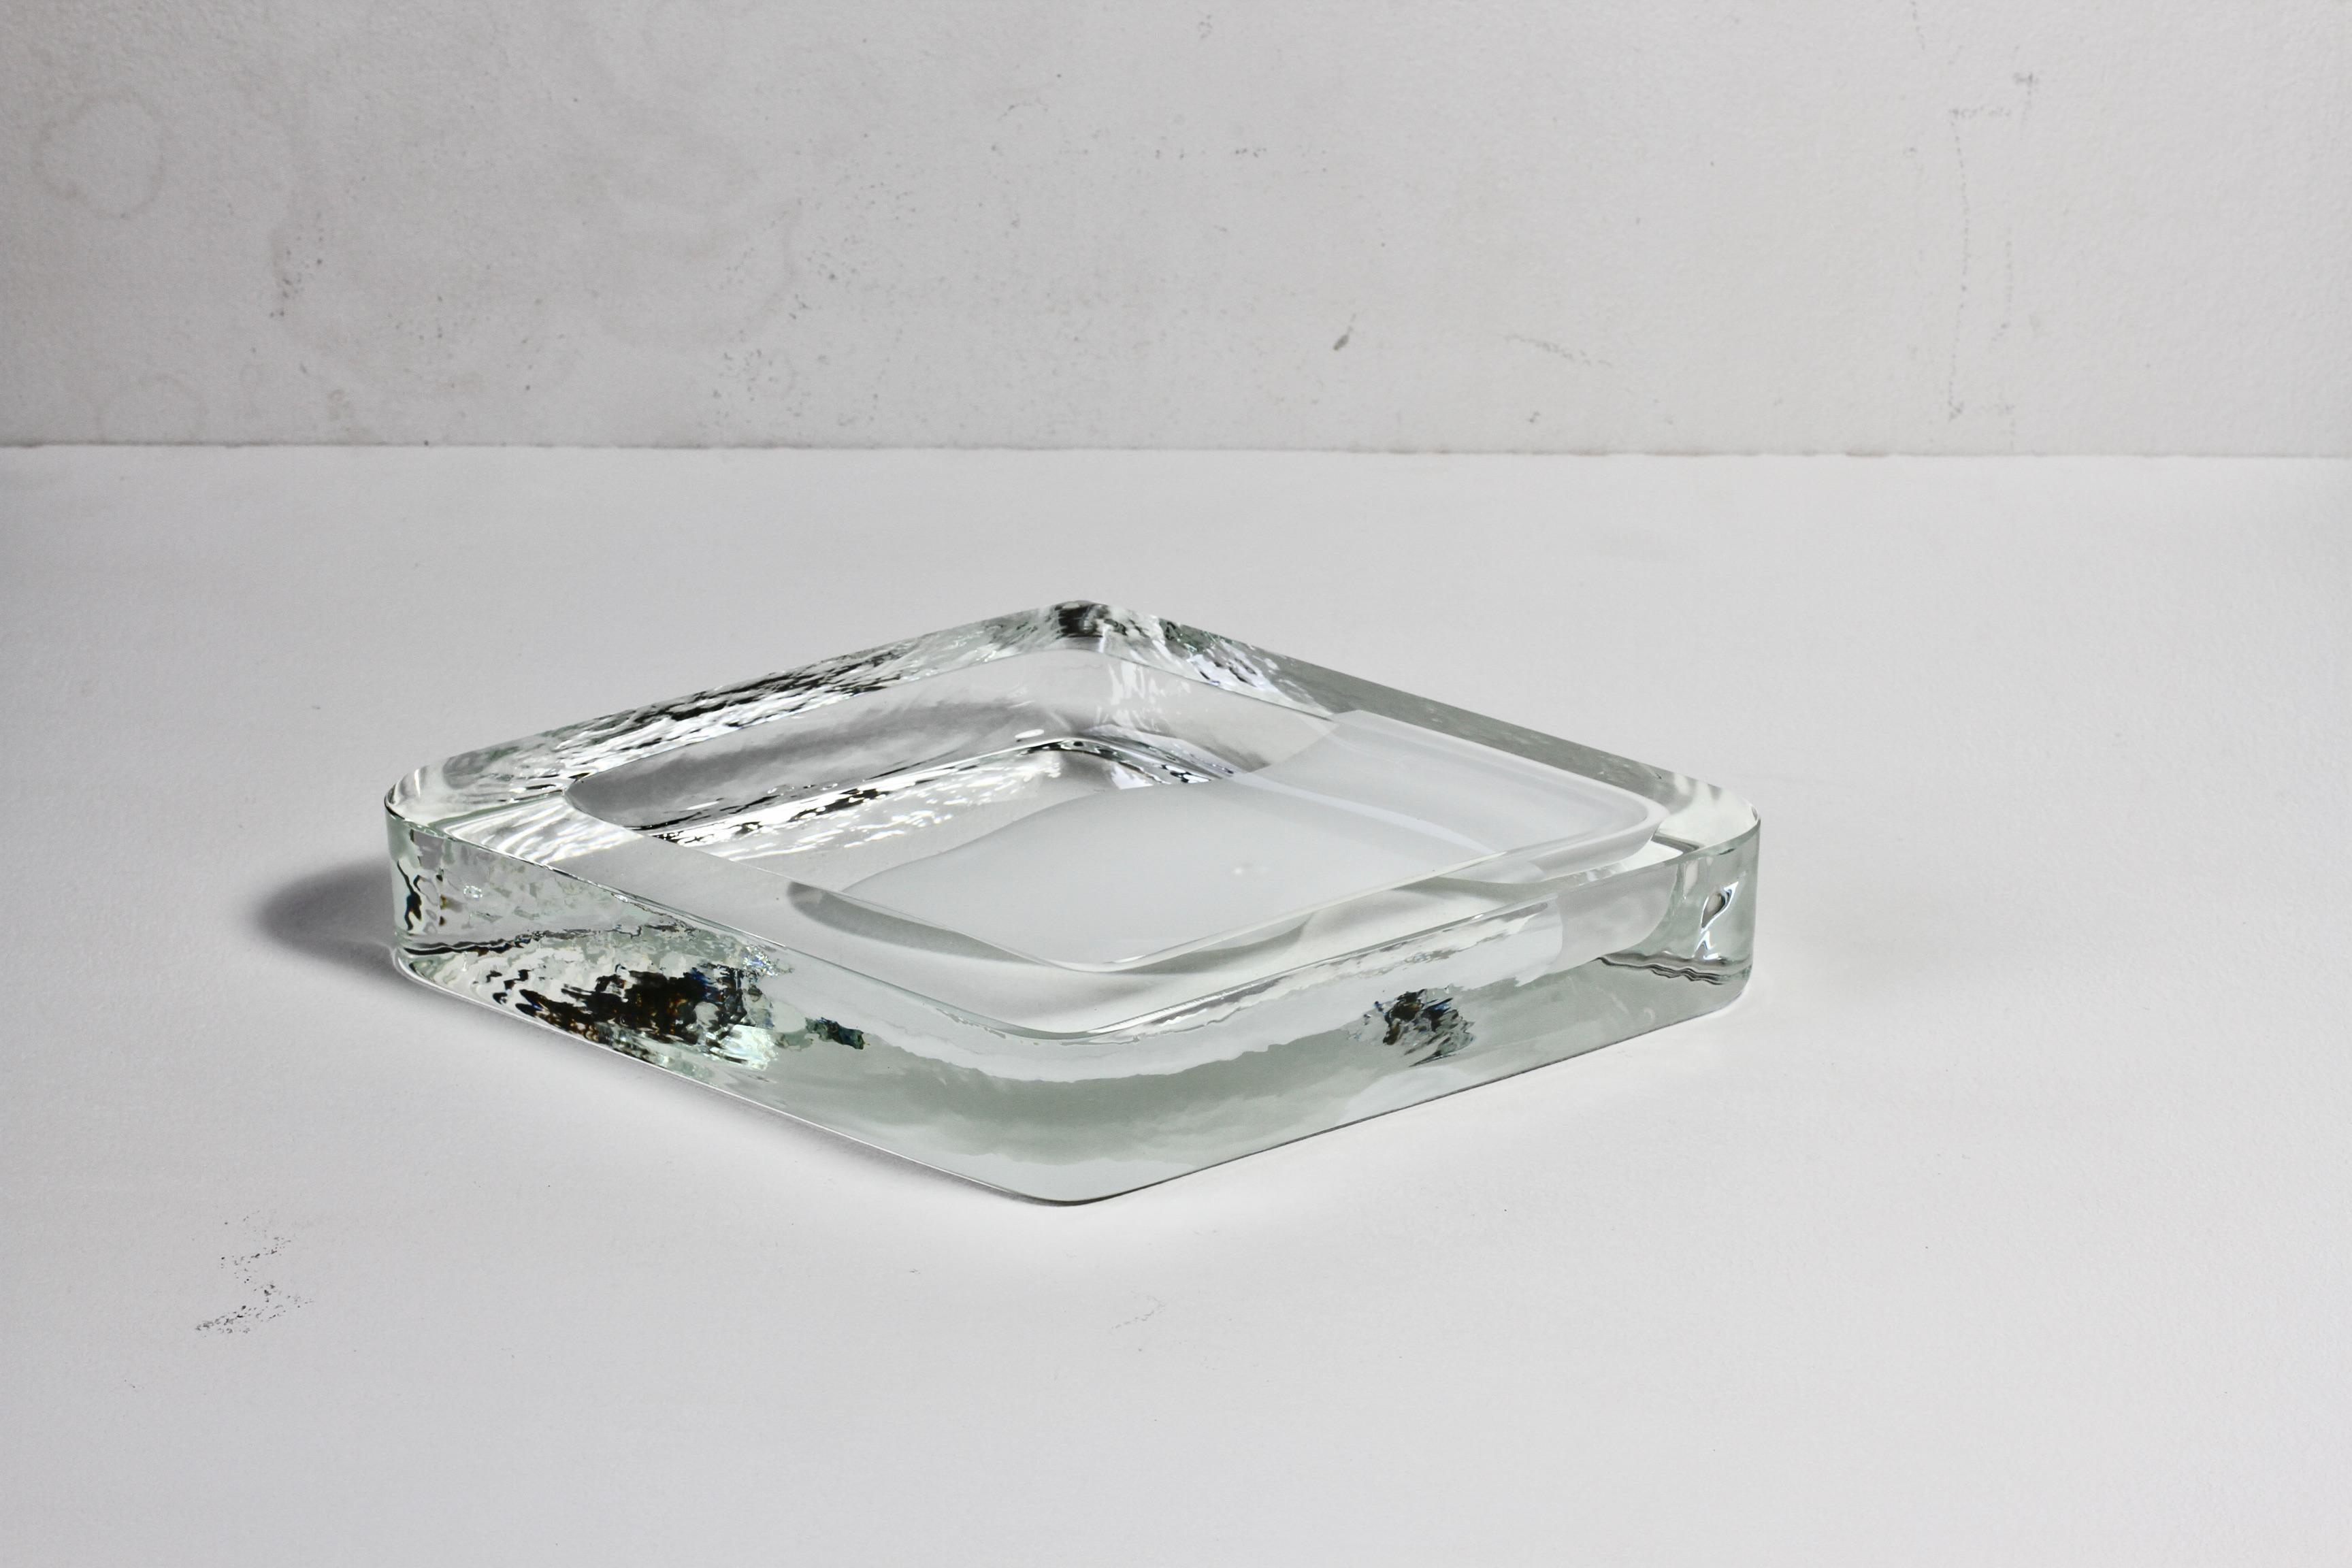 Huge Cenedese Italian Rhombus White and Clear Murano Glass Bowl, Dish, Ashtray For Sale 2